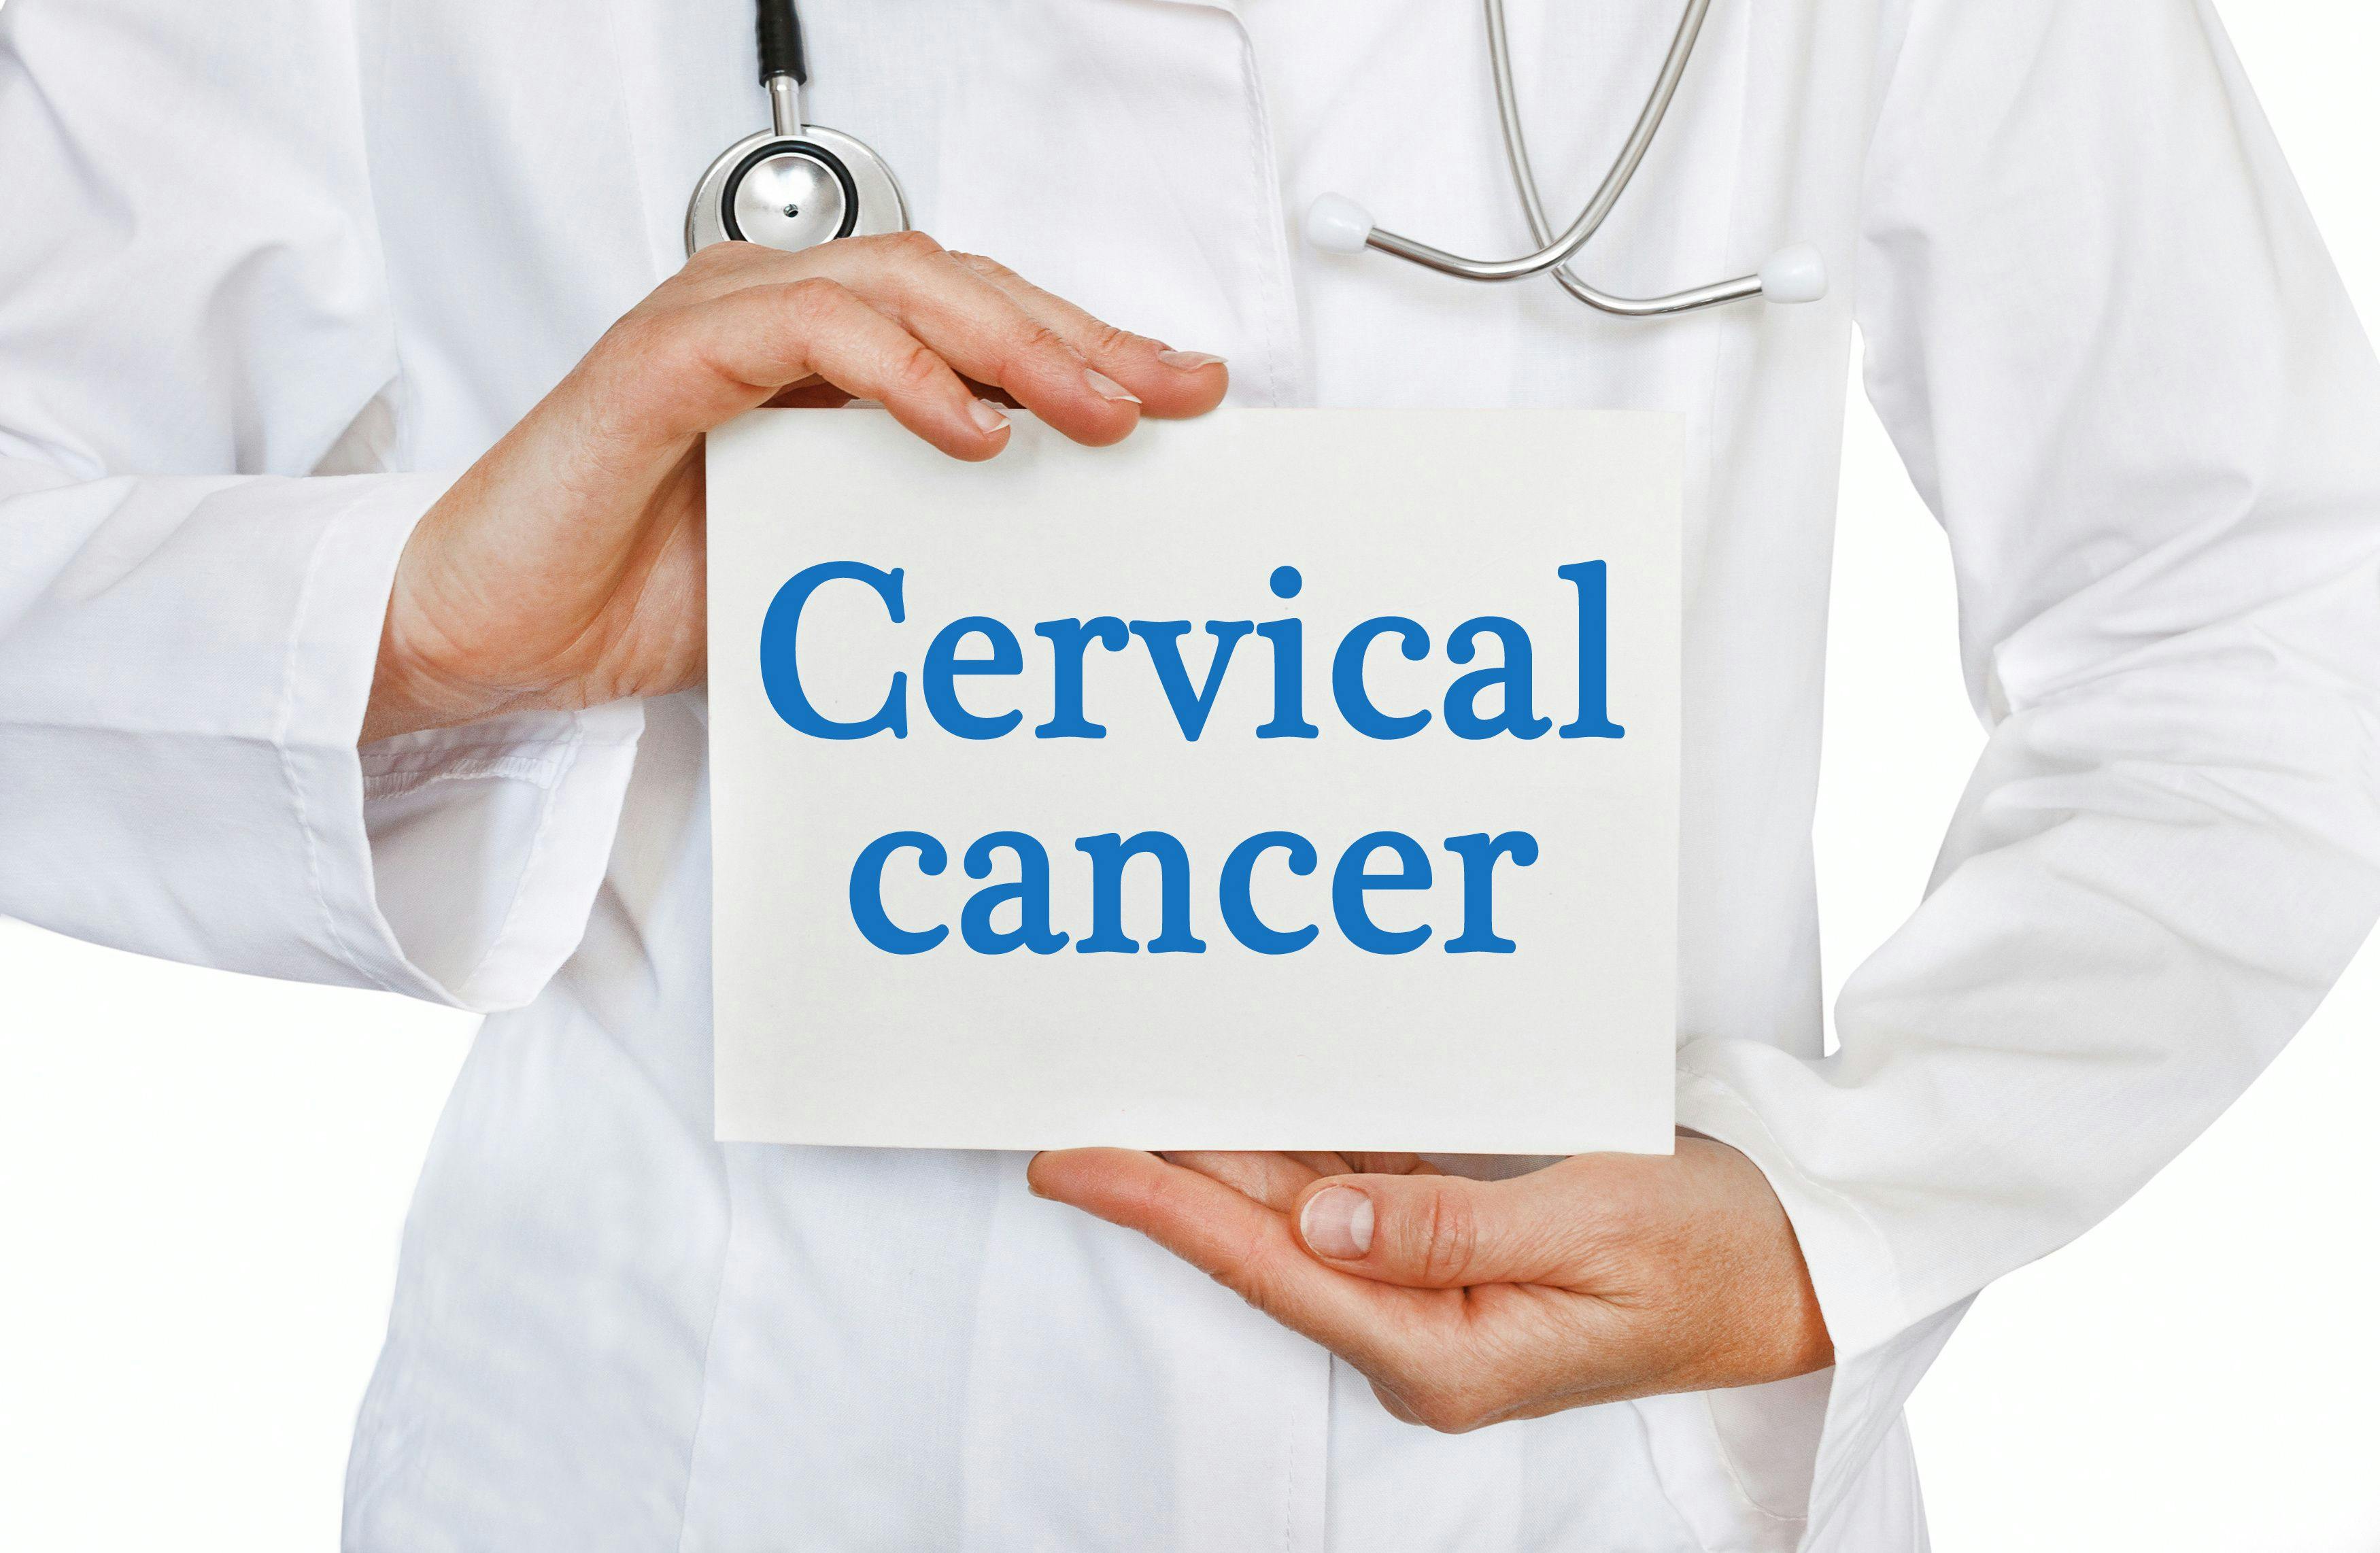 Promising Therapies Emerging for Recurrent/Metastatic Cervical Cancer